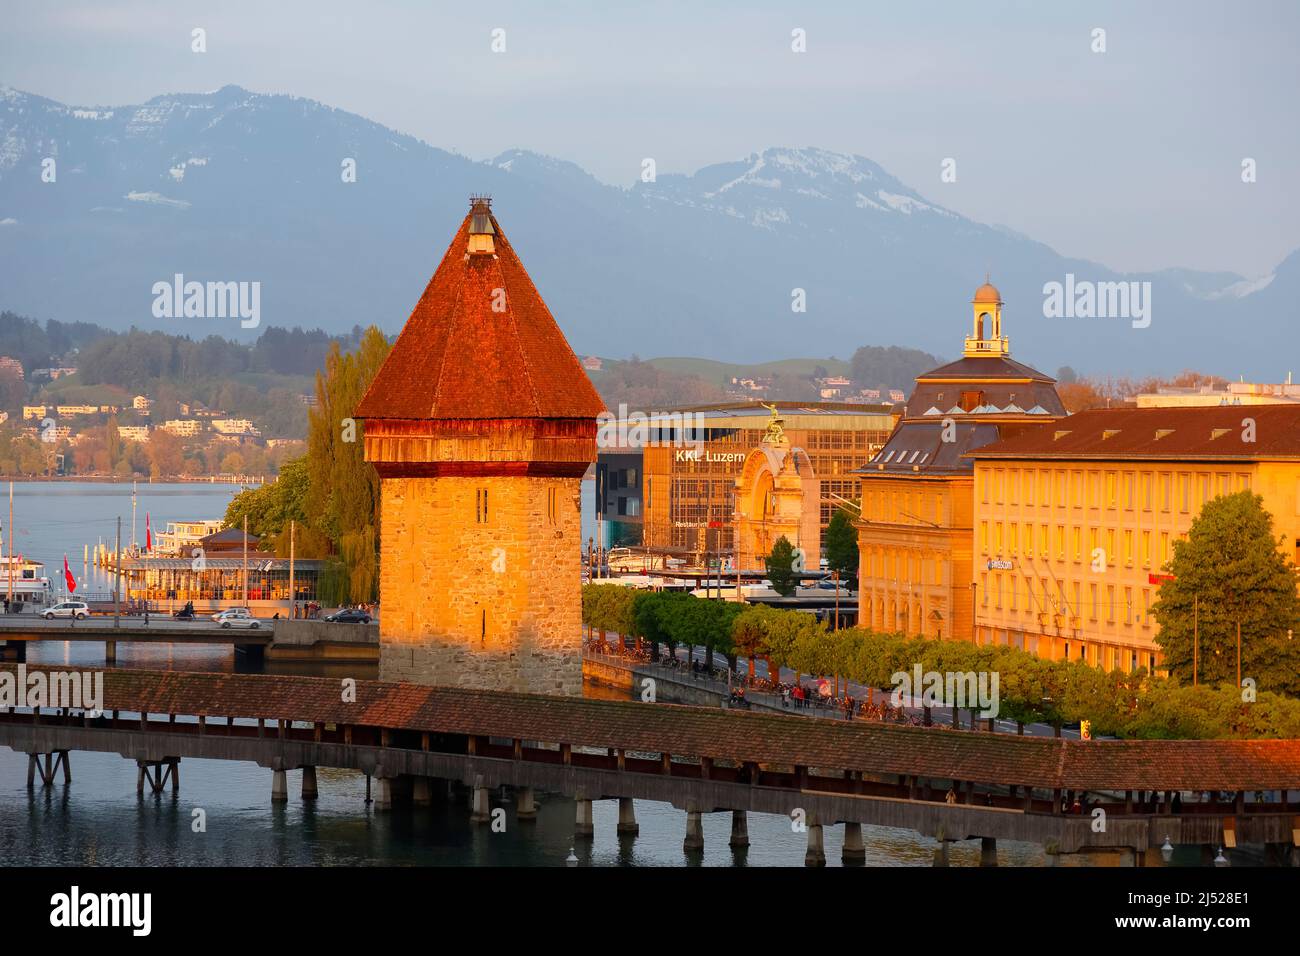 Lucerne, Switzerland - May 02, 2016: Evening view of the octagonal tower which was built in the Reuss River and is located next to the covered Chapel Stock Photo